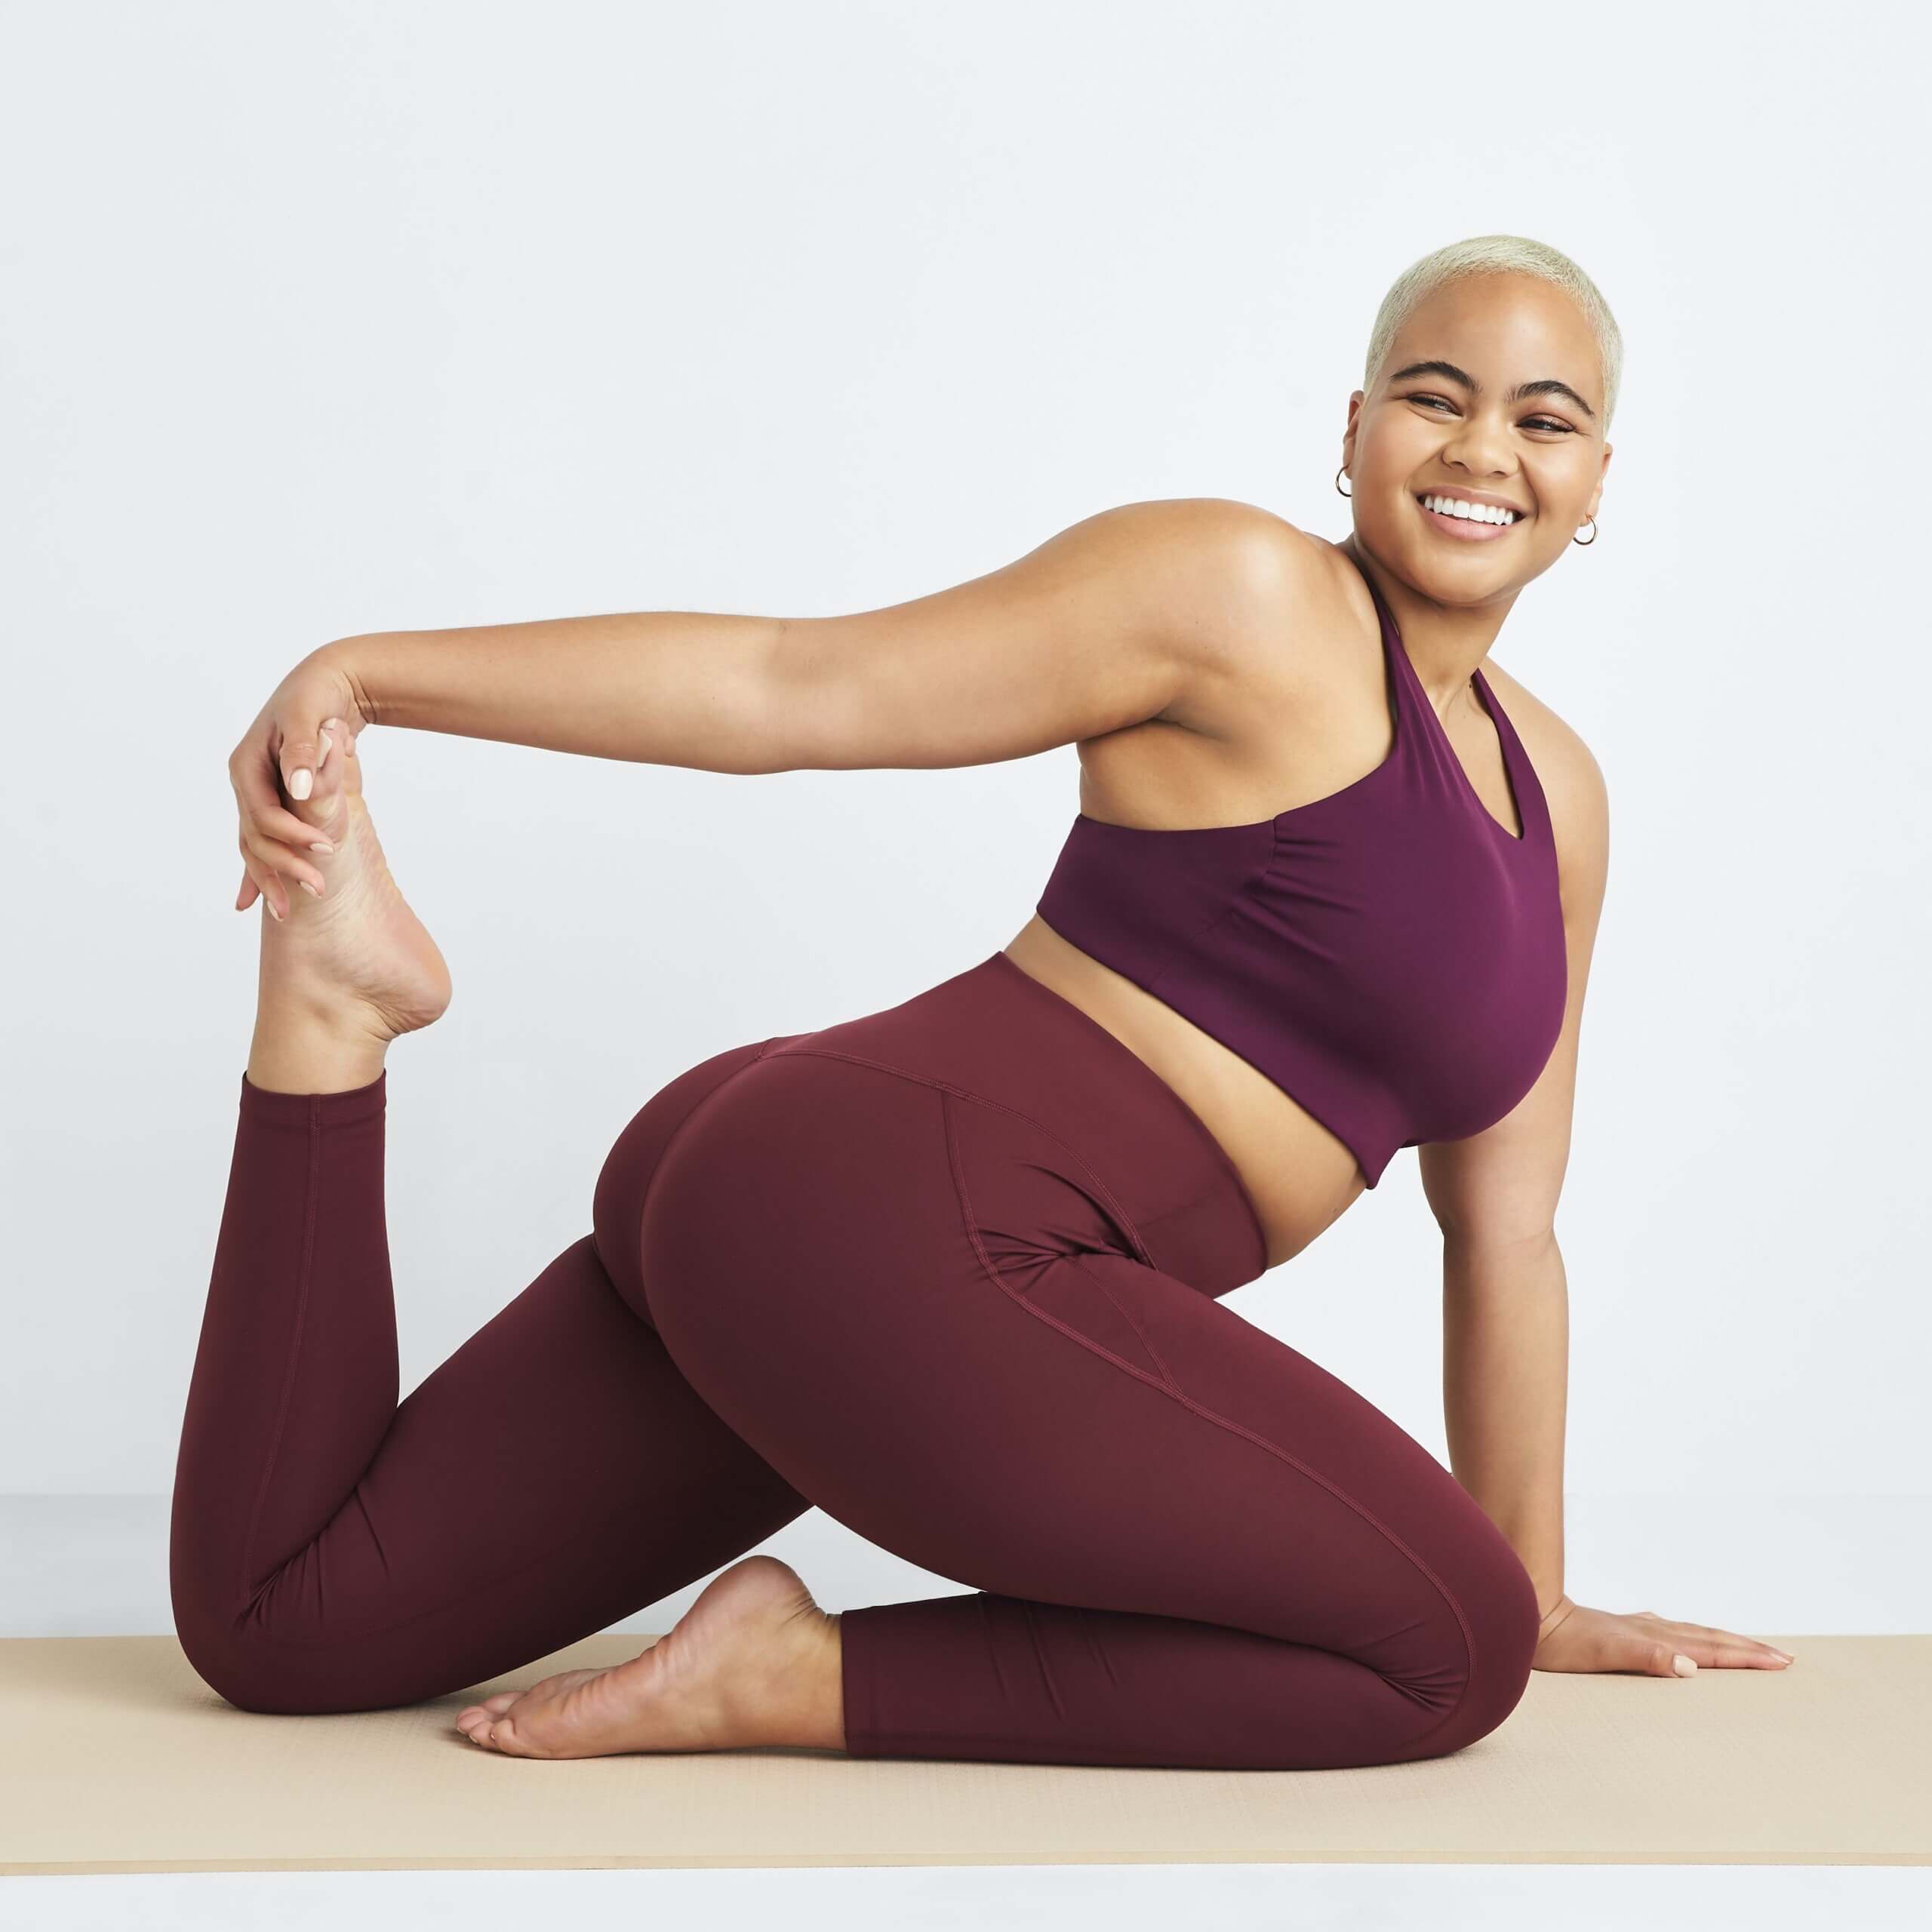 What to Wear to Yoga: Learn the Basics from A to Zen